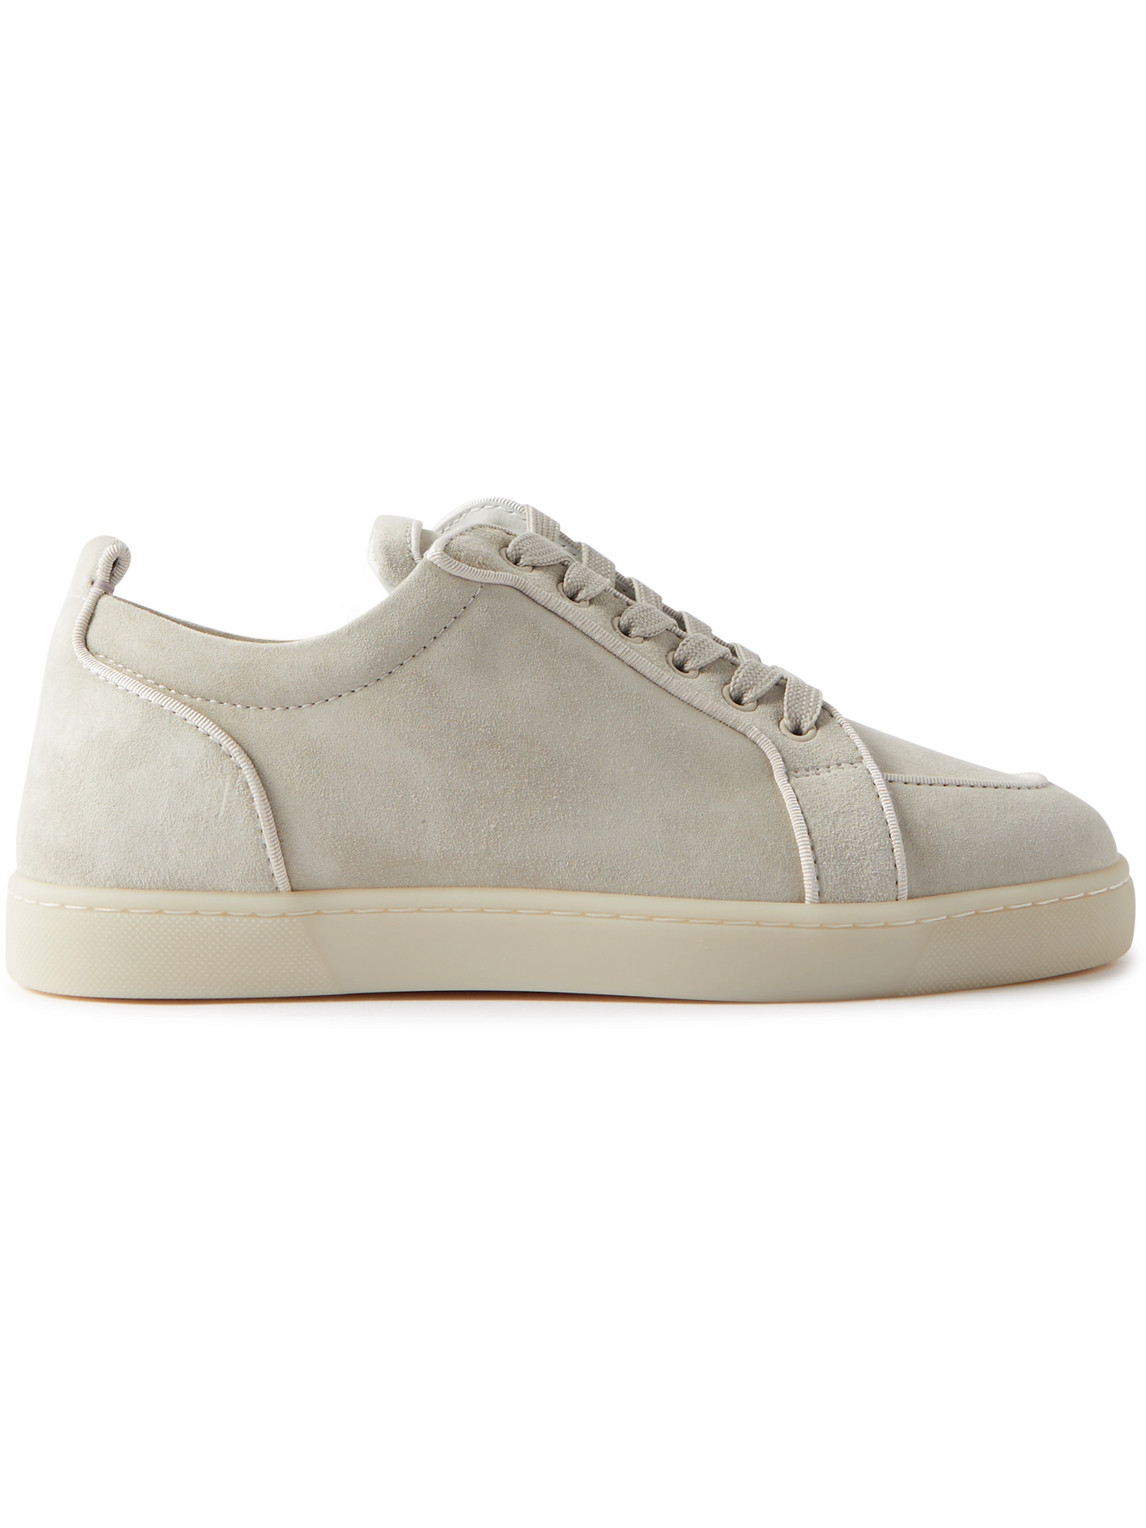 Christian Louboutin Rantulow Suede Trainers In Grey